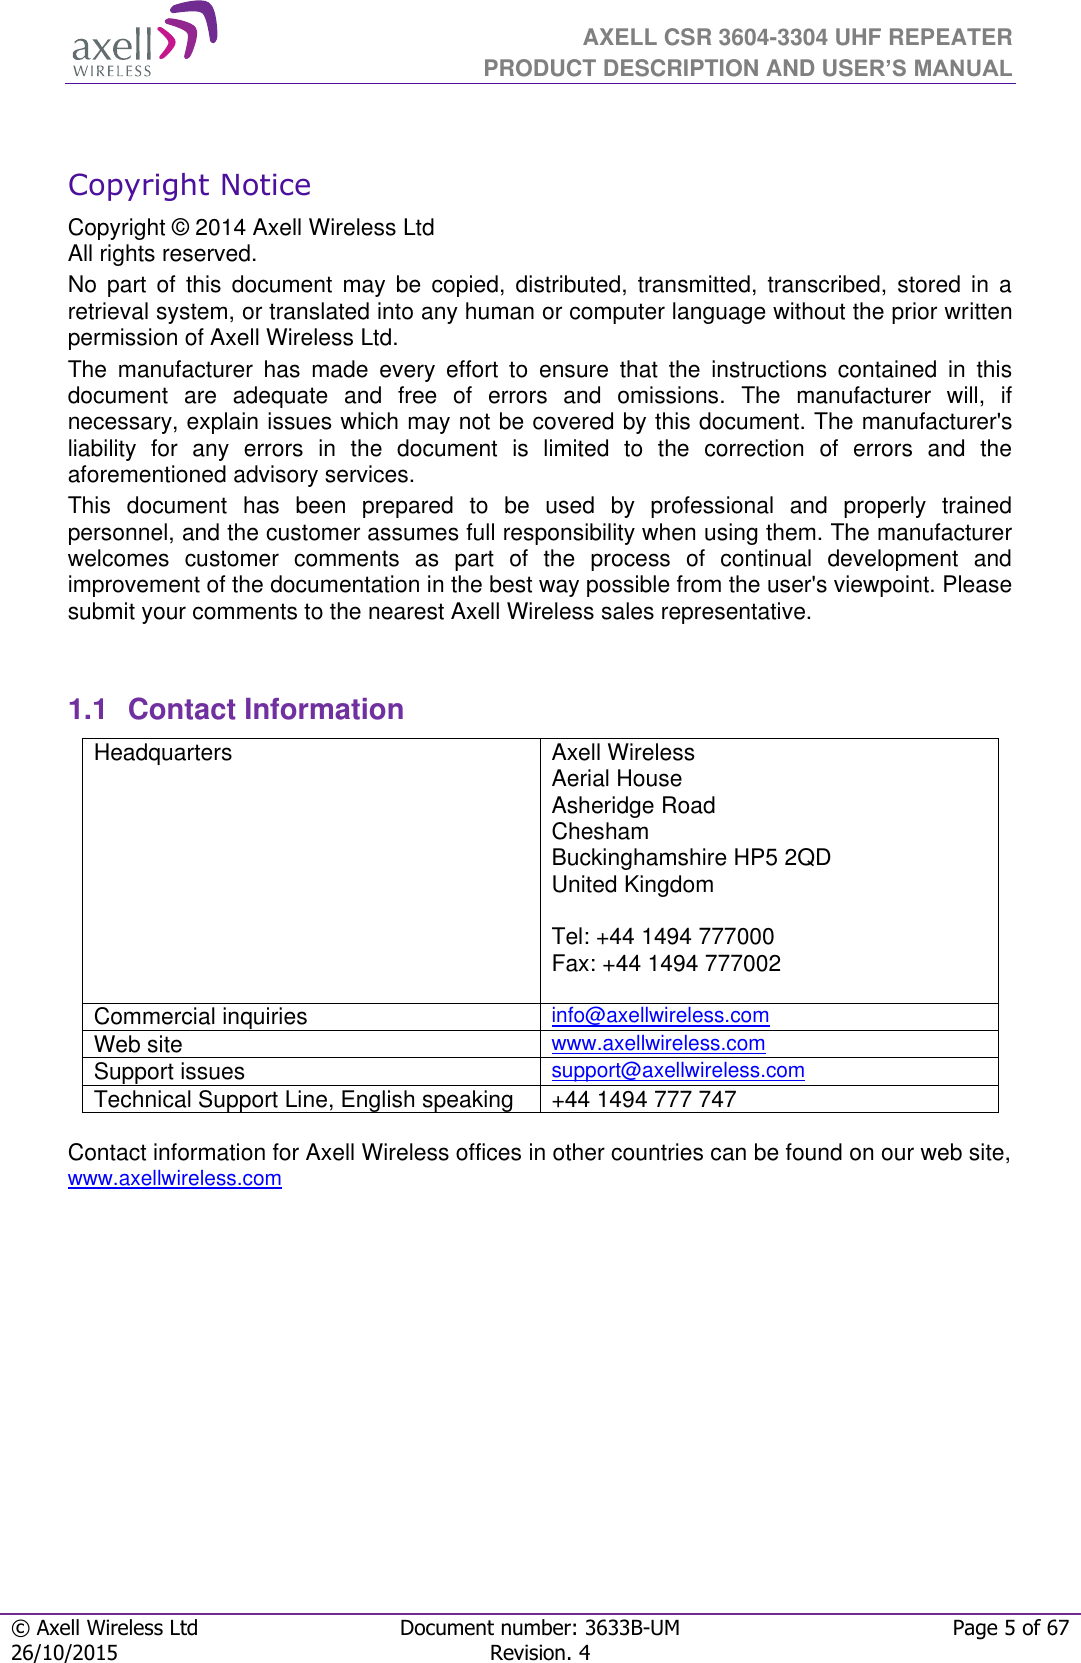  AXELL CSR 3604-3304 UHF REPEATER PRODUCT DESCRIPTION AND USER’S MANUAL  © Axell Wireless Ltd Document number: 3633B-UM Page 5 of 67 26/10/2015 Revision. 4    Copyright Notice Copyright © 2014 Axell Wireless Ltd All rights reserved. No  part  of  this  document  may  be  copied,  distributed,  transmitted,  transcribed,  stored  in  a retrieval system, or translated into any human or computer language without the prior written permission of Axell Wireless Ltd. The  manufacturer  has  made  every  effort  to  ensure  that  the  instructions  contained  in  this document  are  adequate  and  free  of  errors  and  omissions.  The  manufacturer  will,  if necessary, explain issues which may not be covered by this document. The manufacturer&apos;s liability  for  any  errors  in  the  document  is  limited  to  the  correction  of  errors  and  the aforementioned advisory services. This  document  has  been  prepared  to  be  used  by  professional  and  properly  trained personnel, and the customer assumes full responsibility when using them. The manufacturer welcomes  customer  comments  as  part  of  the  process  of  continual  development  and improvement of the documentation in the best way possible from the user&apos;s viewpoint. Please submit your comments to the nearest Axell Wireless sales representative.   1.1  Contact Information Headquarters Axell Wireless Aerial House  Asheridge Road  Chesham  Buckinghamshire HP5 2QD  United Kingdom   Tel: +44 1494 777000  Fax: +44 1494 777002   Commercial inquiries info@axellwireless.com Web site www.axellwireless.com Support issues support@axellwireless.com Technical Support Line, English speaking +44 1494 777 747  Contact information for Axell Wireless offices in other countries can be found on our web site, www.axellwireless.com        